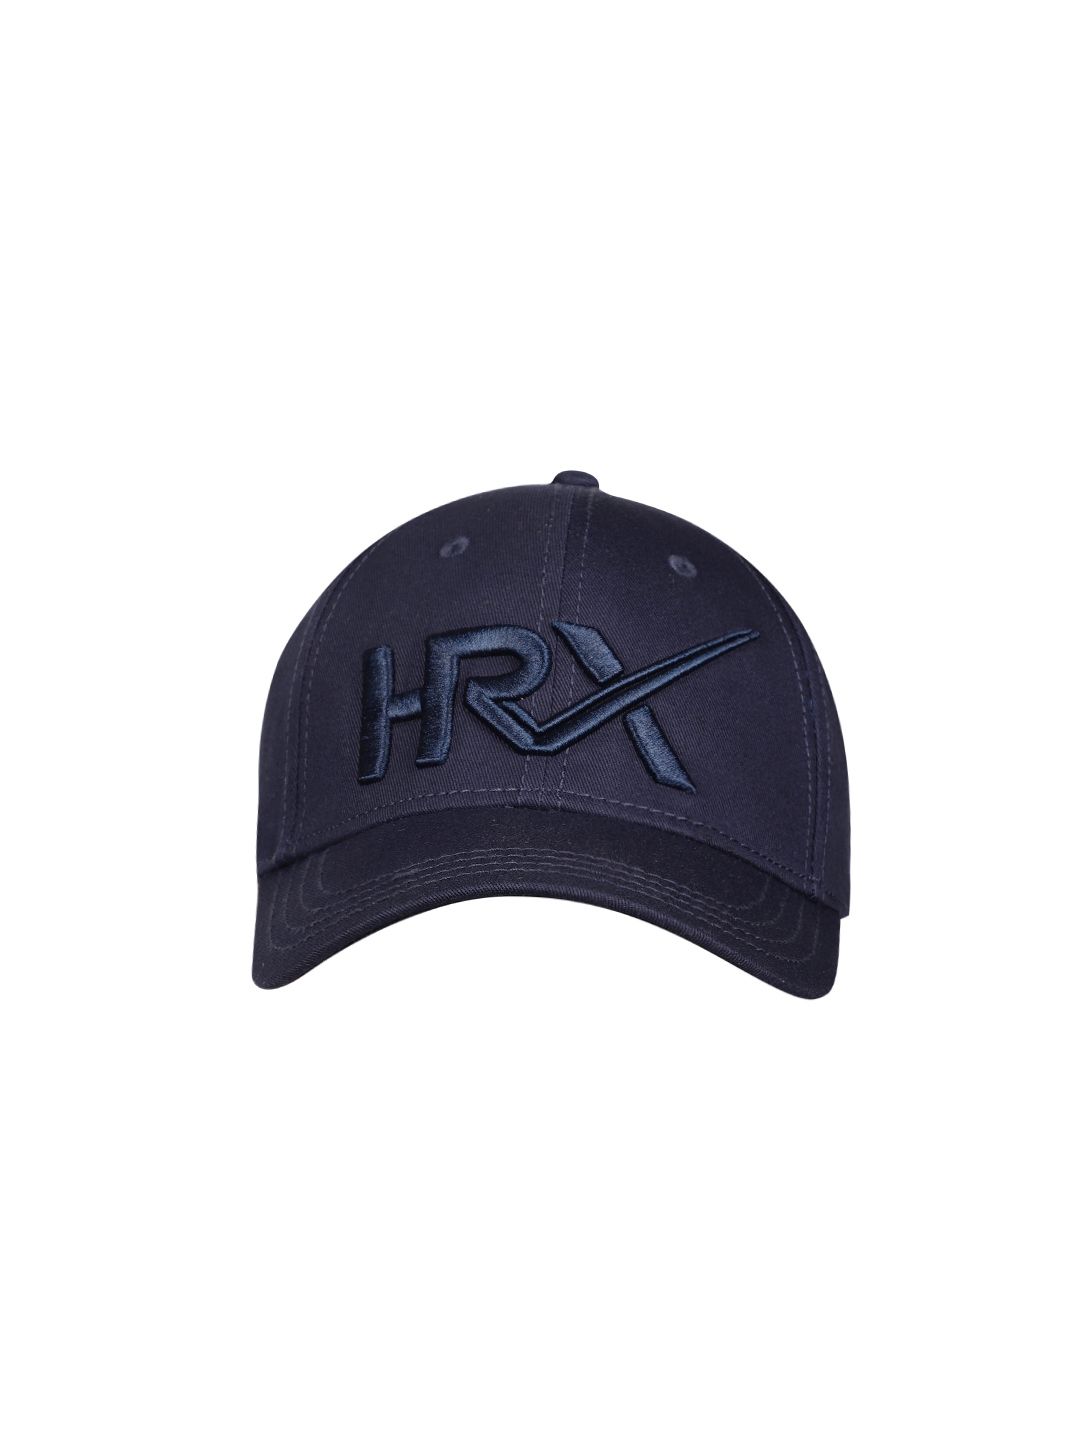 HRX by Hrithik Roshan Unisex Navy Blue Solid Lifestyle Cap Price in India